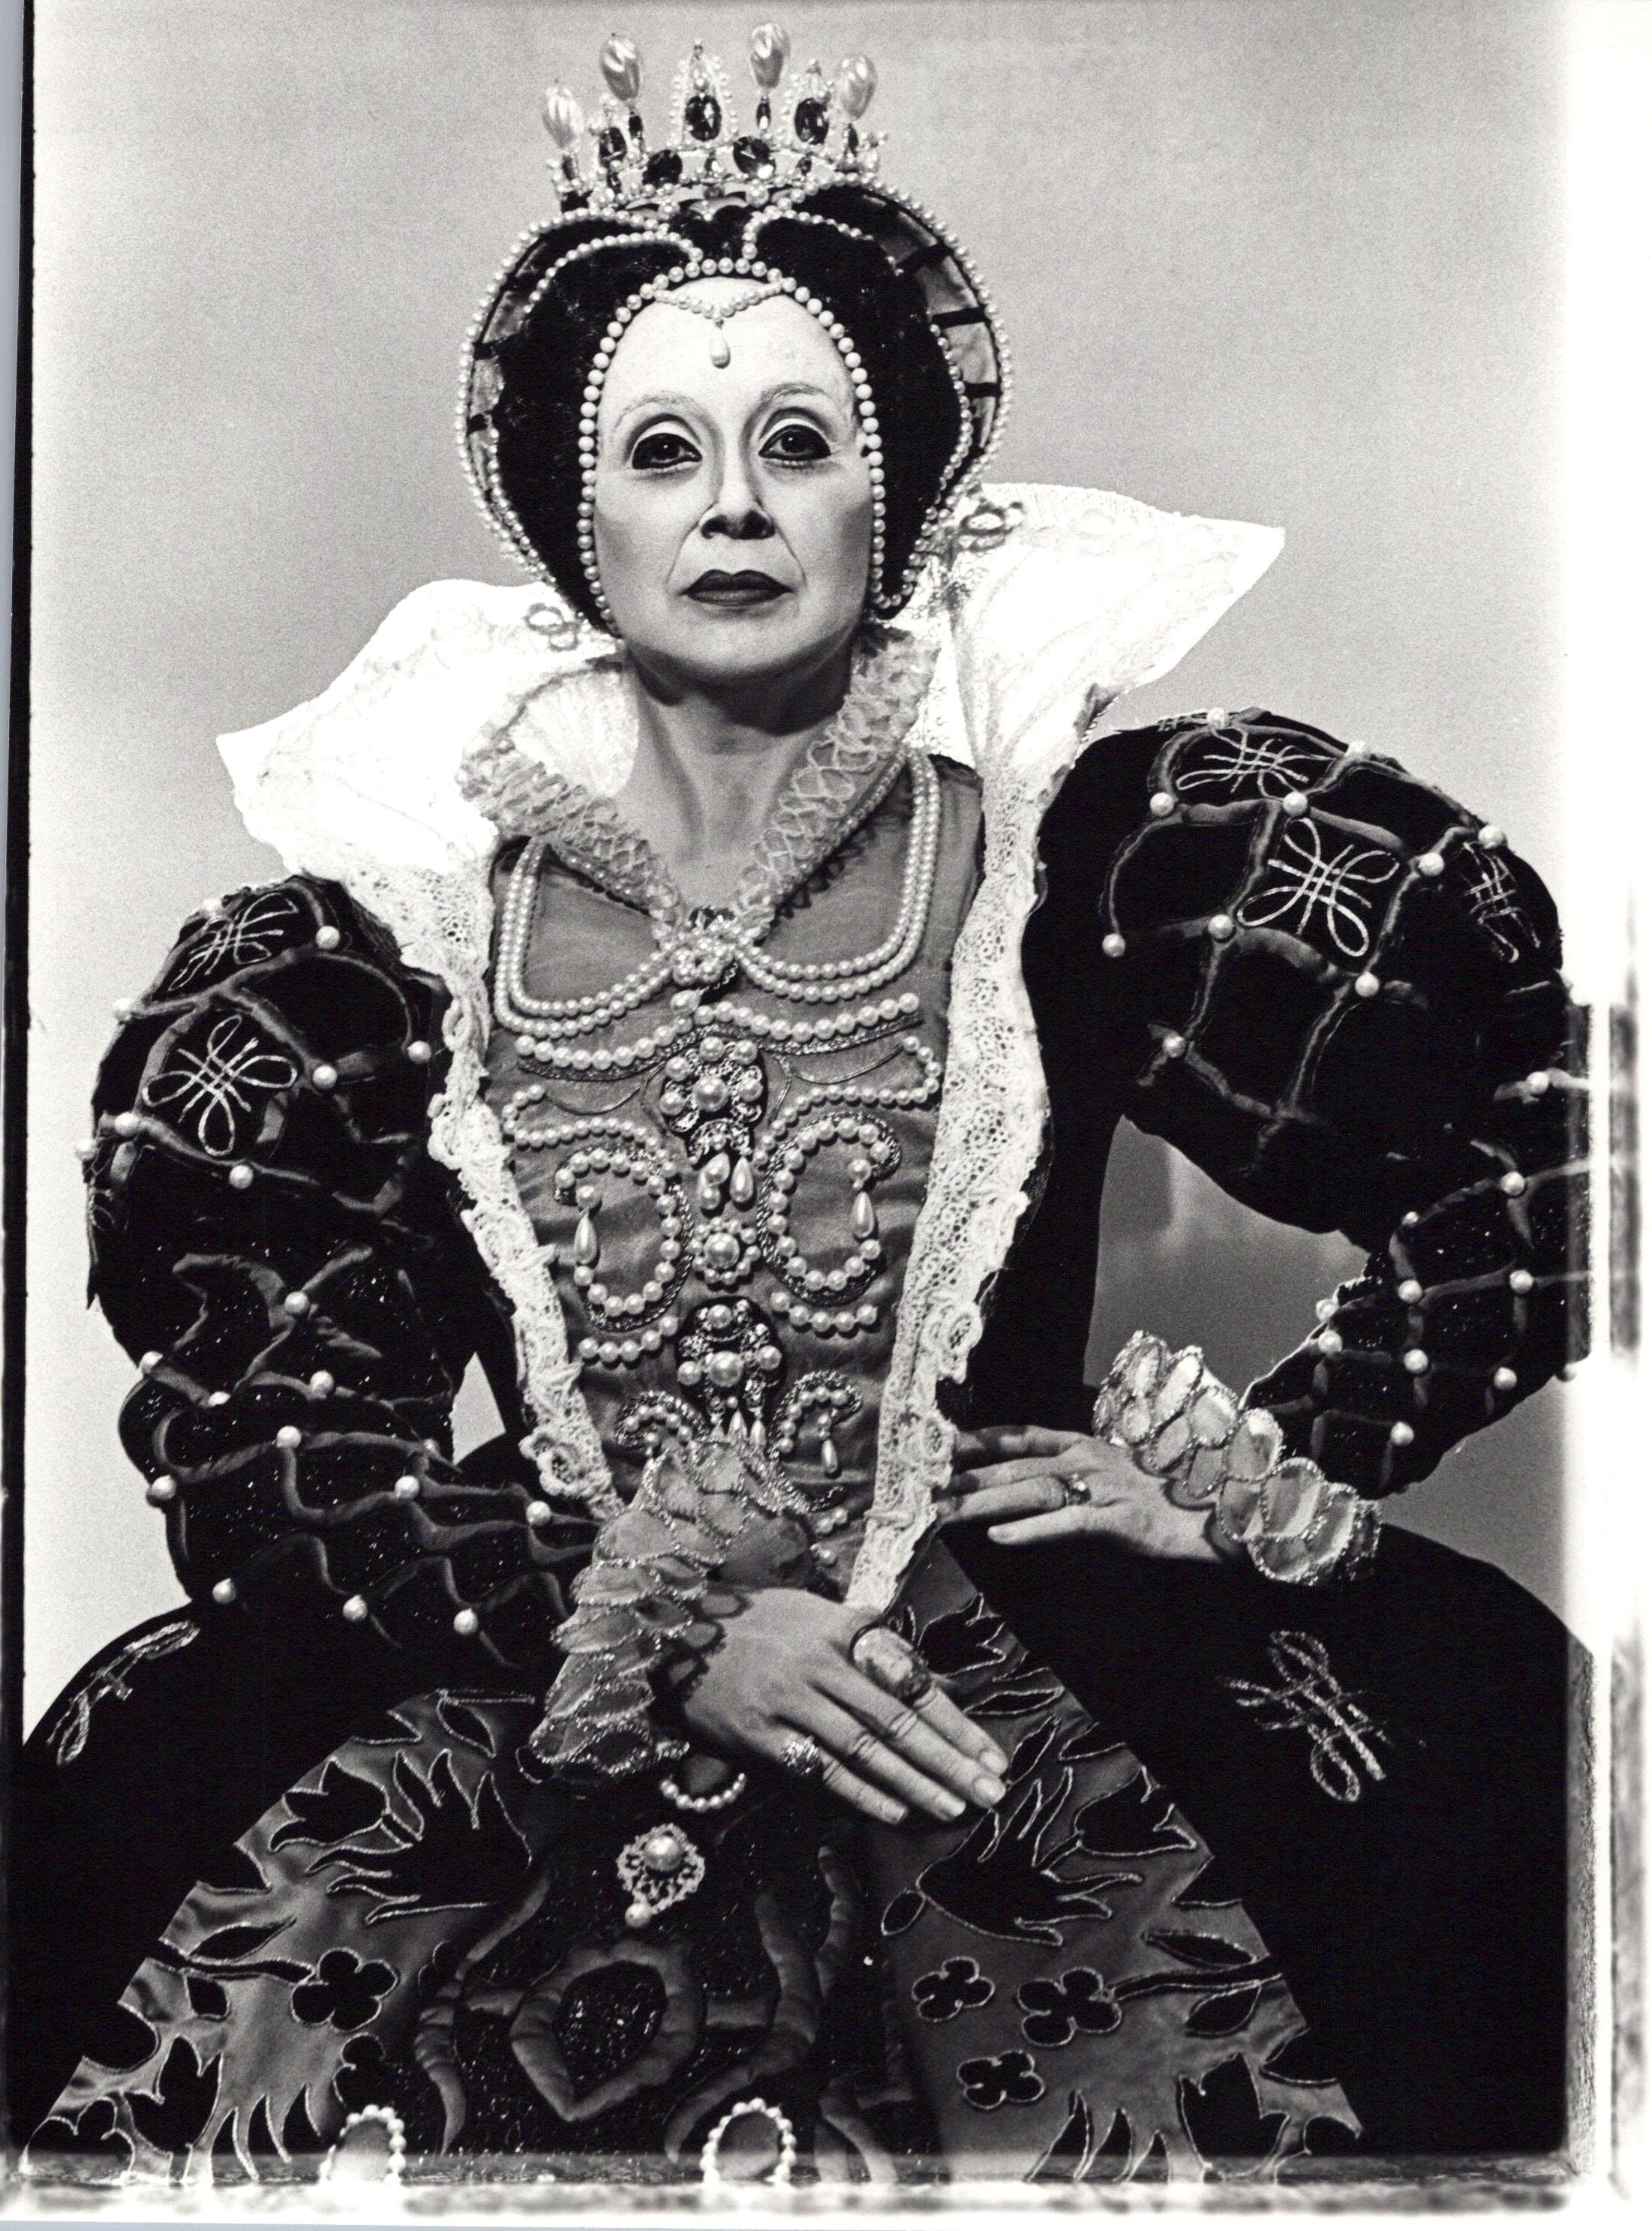 Jack Mitchell Black and White Photograph - Operatic soprano Beverly Sills in costume as Elizabeth I in 'Roberto Devereux' 